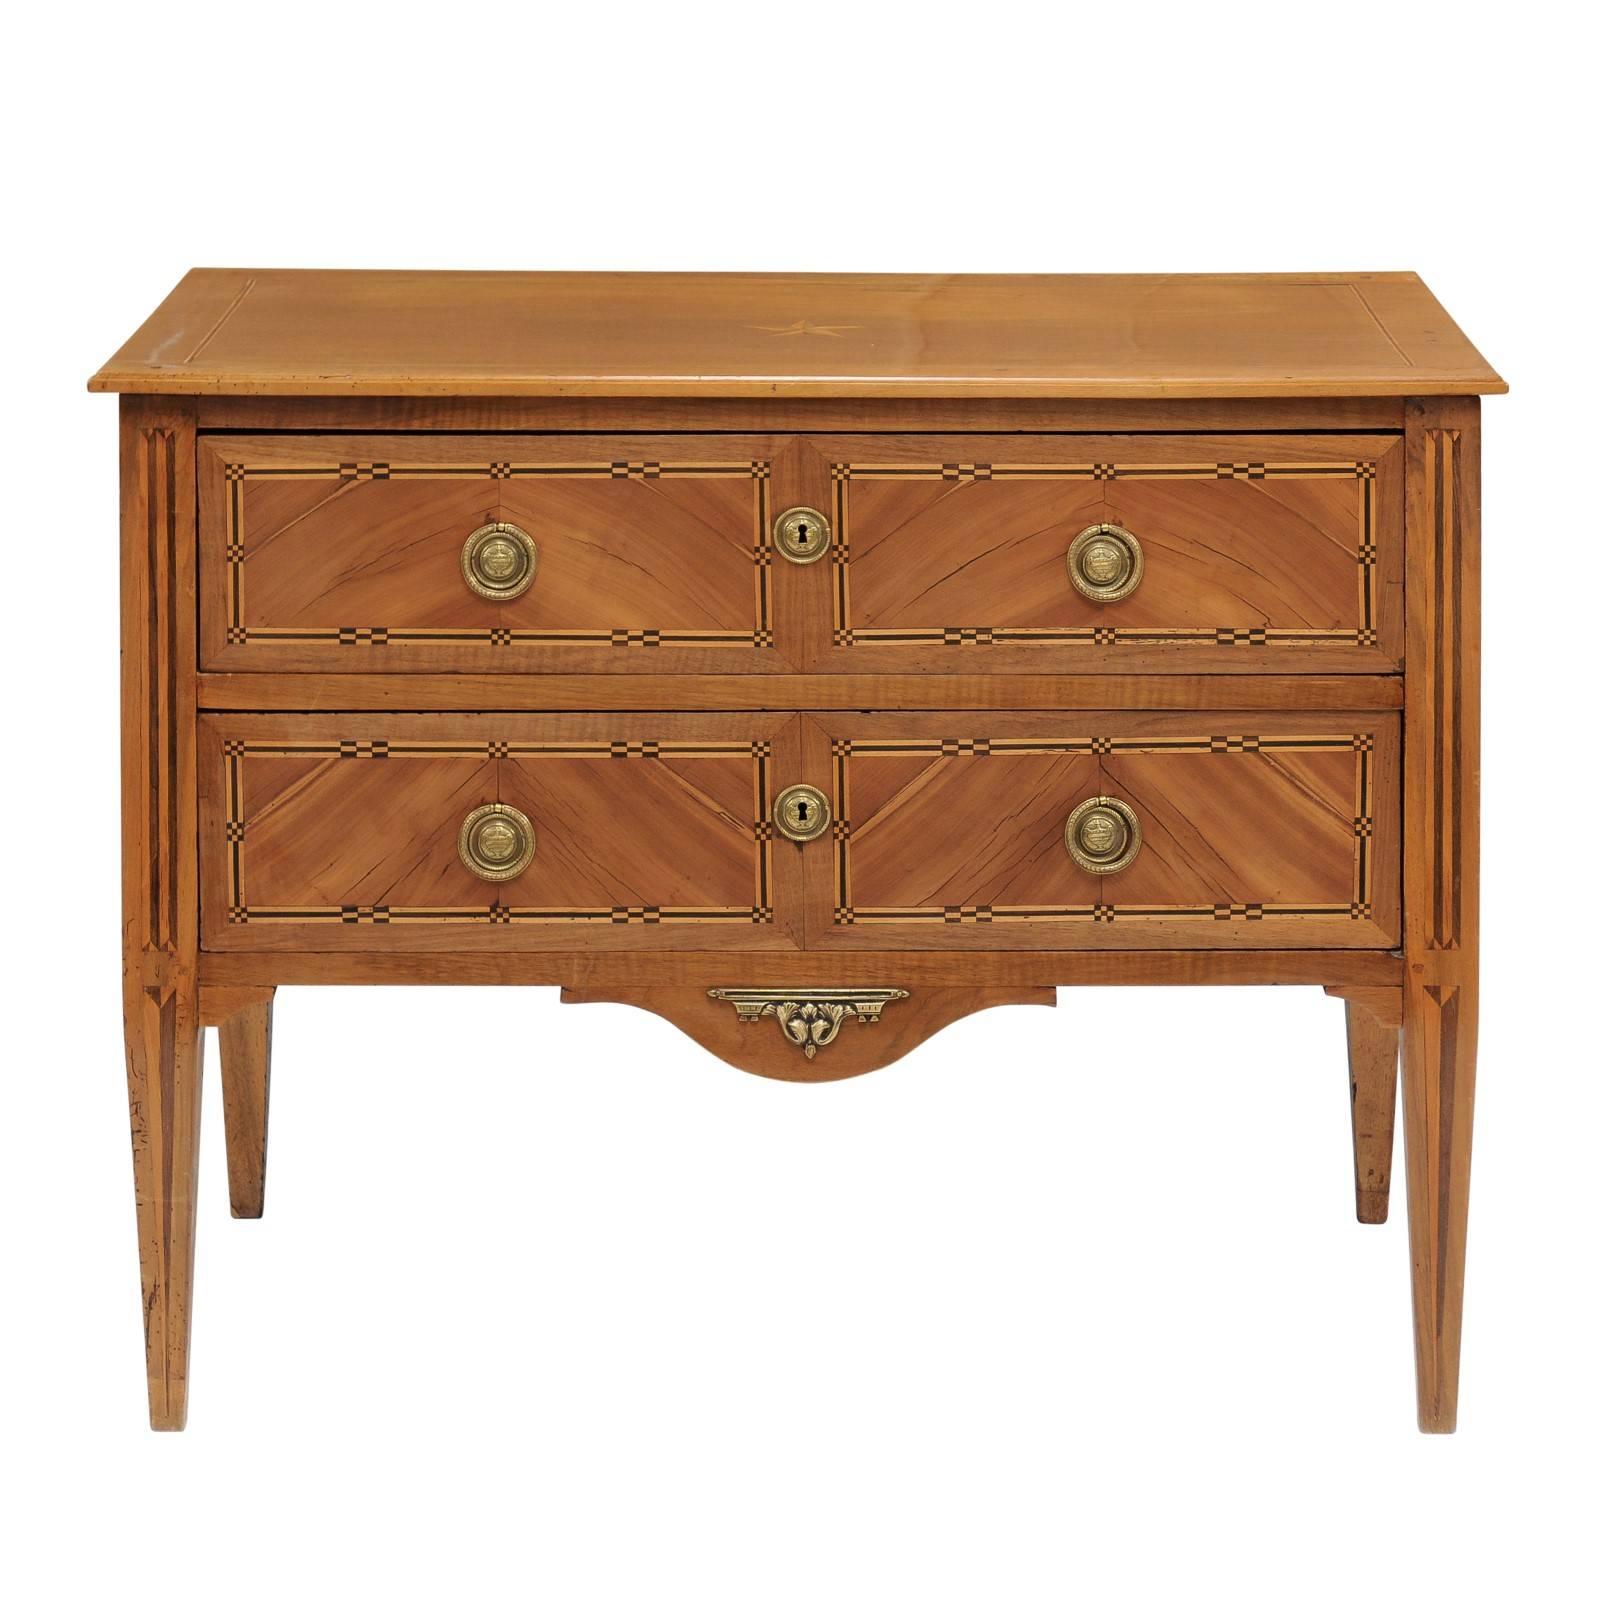 Louis XVI Period French Walnut Commode with Marquetry Décor, Late 18th Century